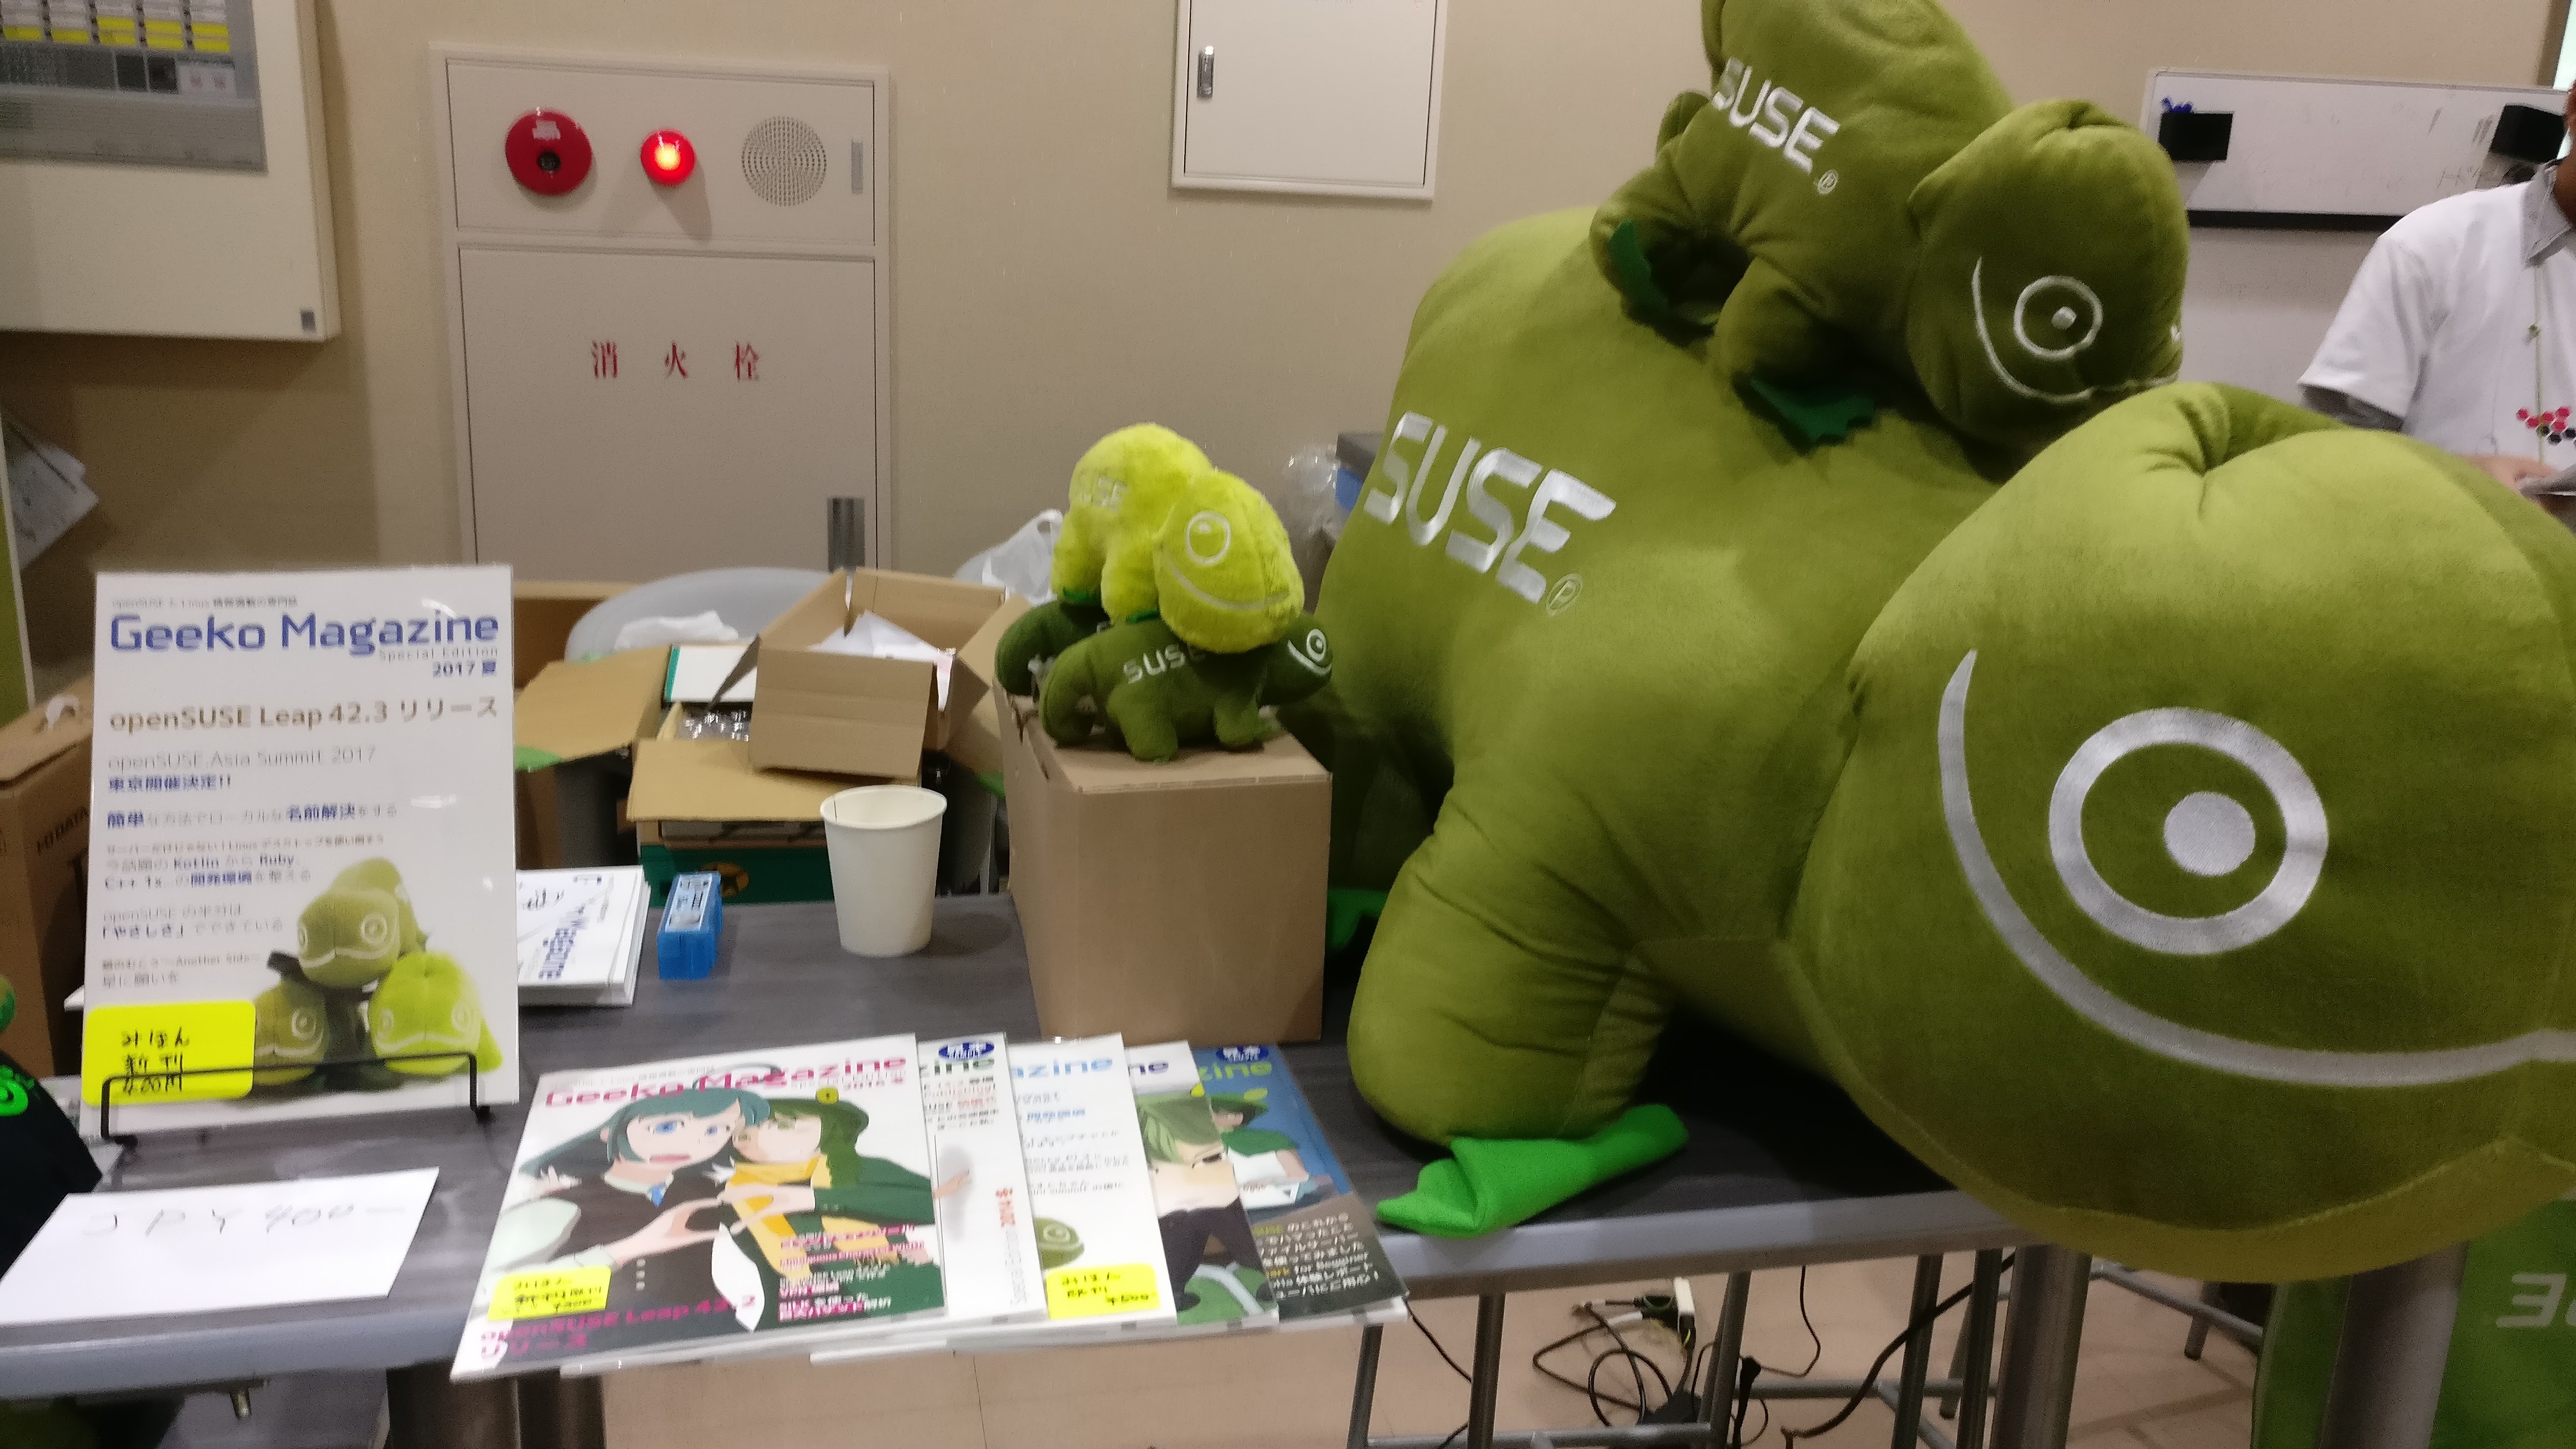 Report for openSUSE.Asia Summit 2017 Tokyo (English)